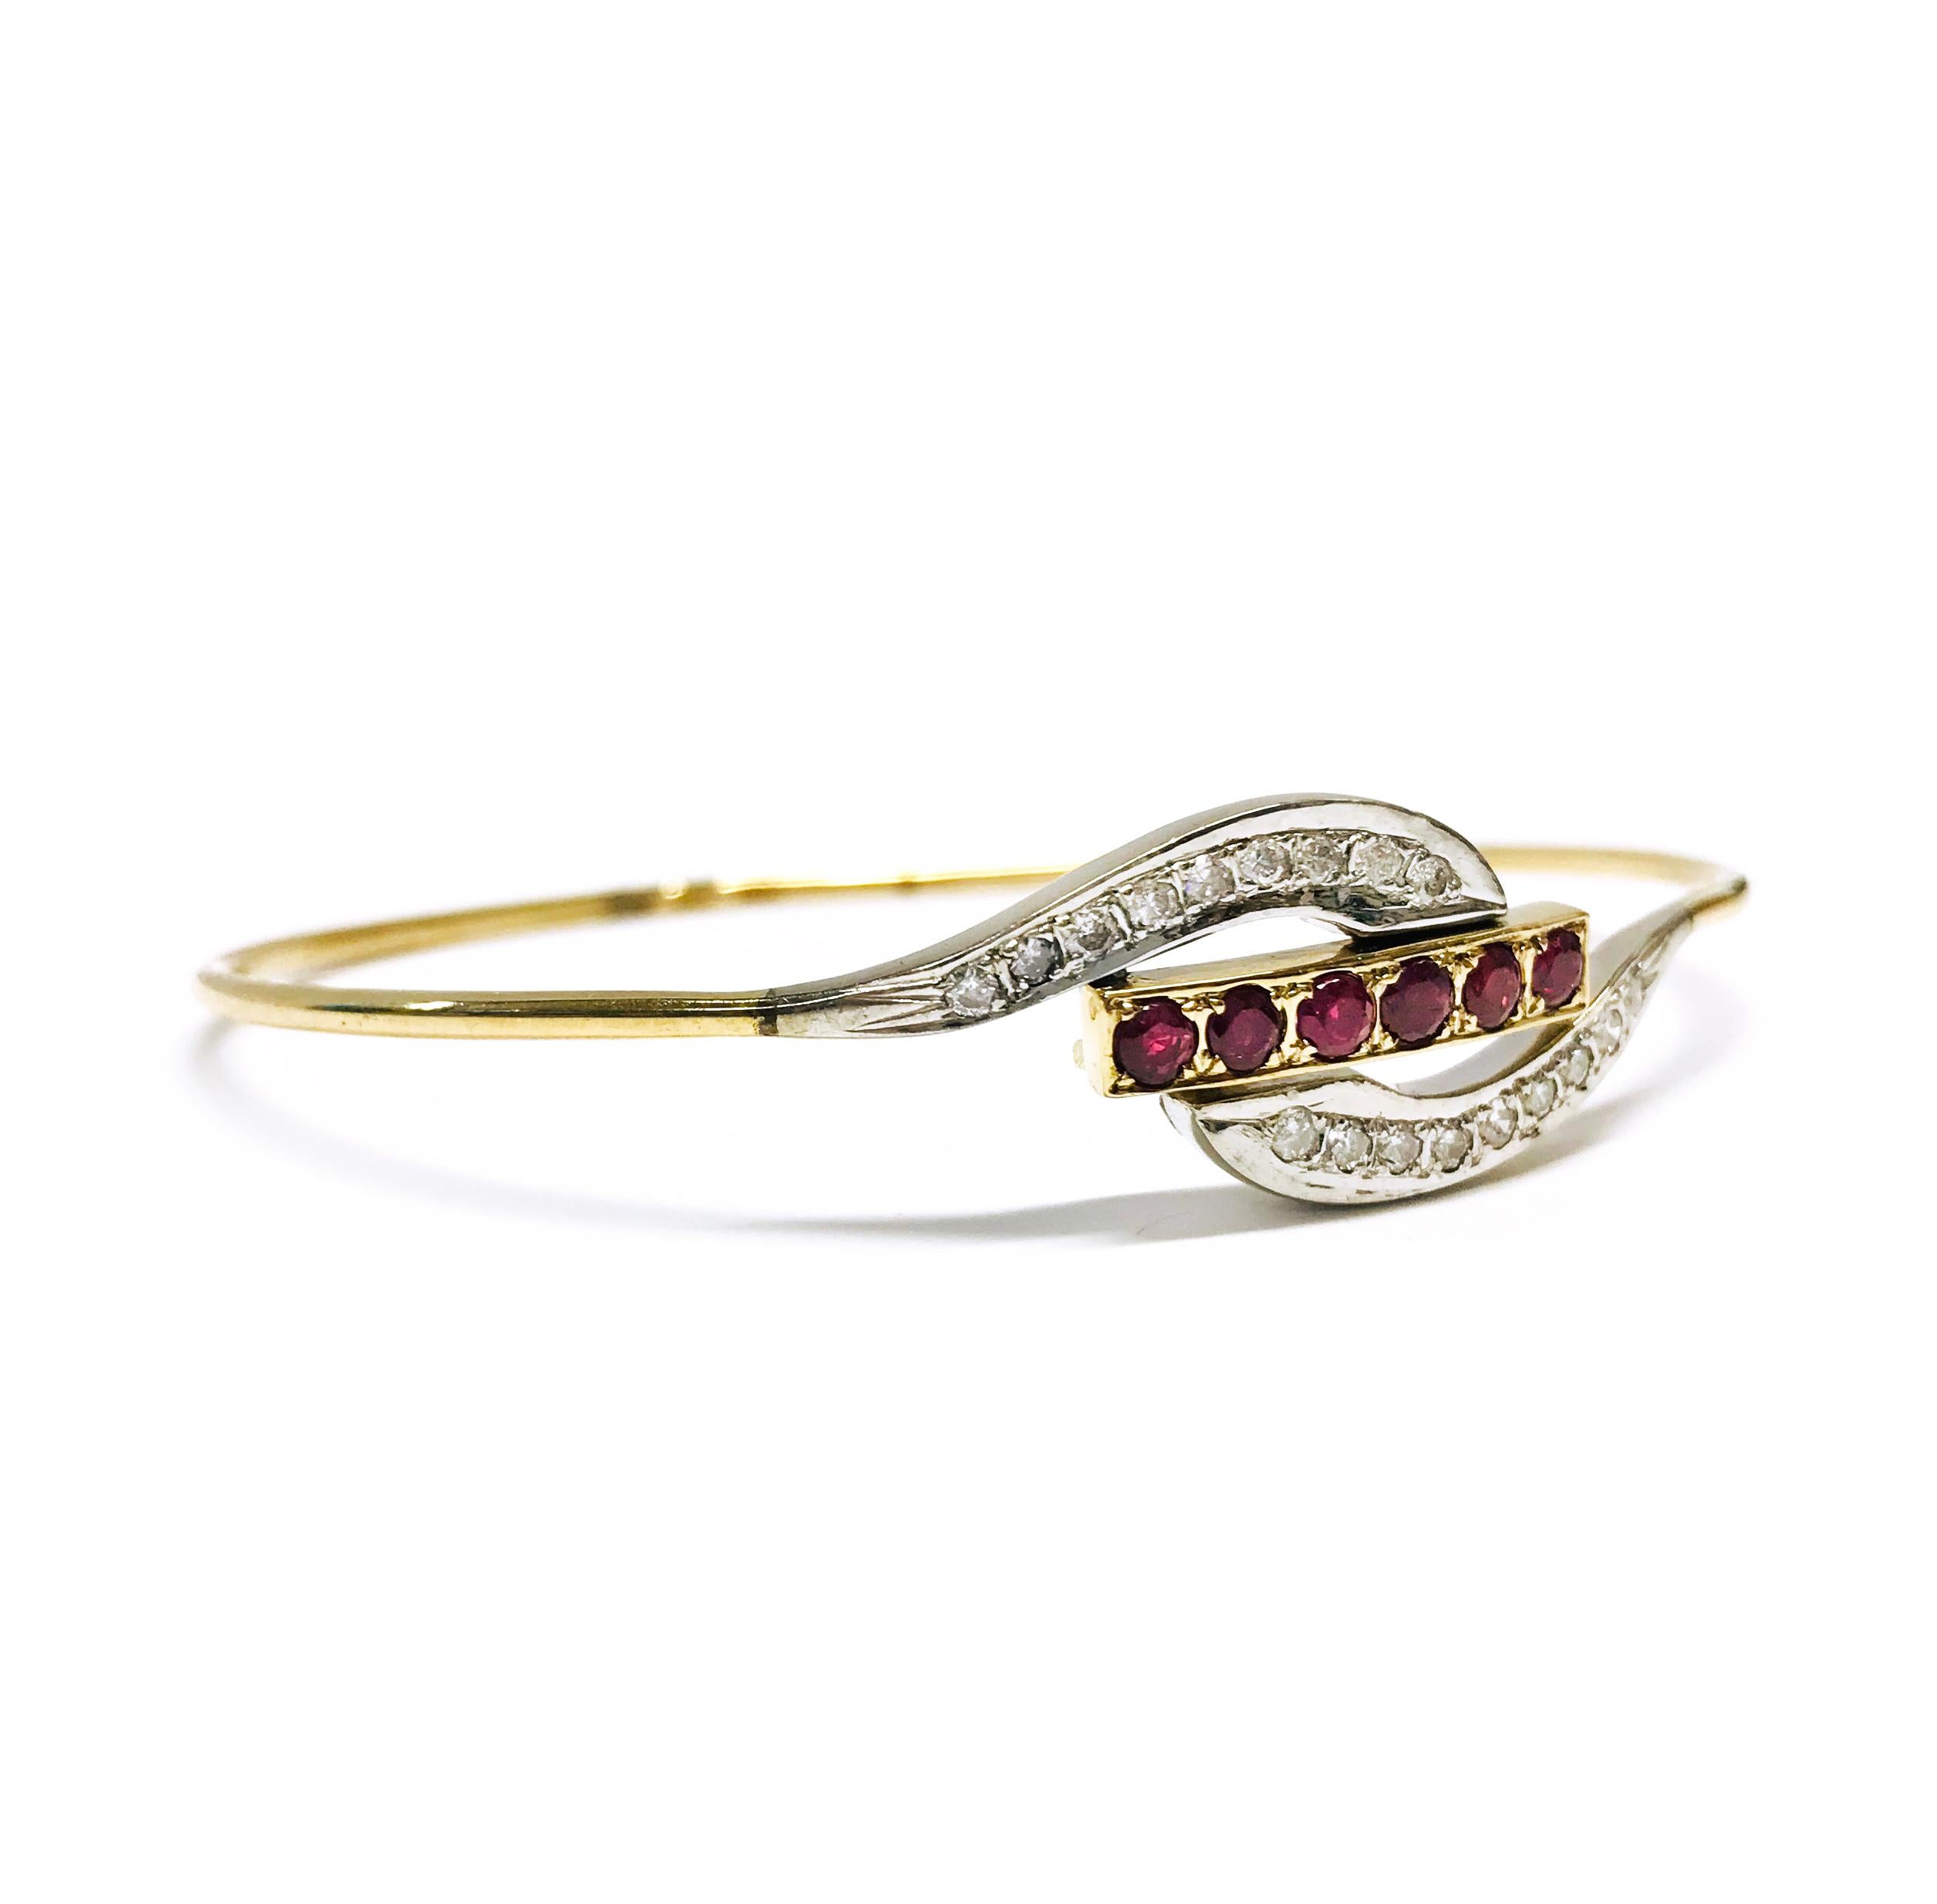 14 Karat Ruby Diamond Wire Bangle Bracelet. A center gold bar of six pave-set Rubies and two curves of eight melee pave-set diamonds each for a total of sixteen round brilliant-cut diamonds set in rhodium. Diamonds are I1 in clarity (G.I.A.). SIx